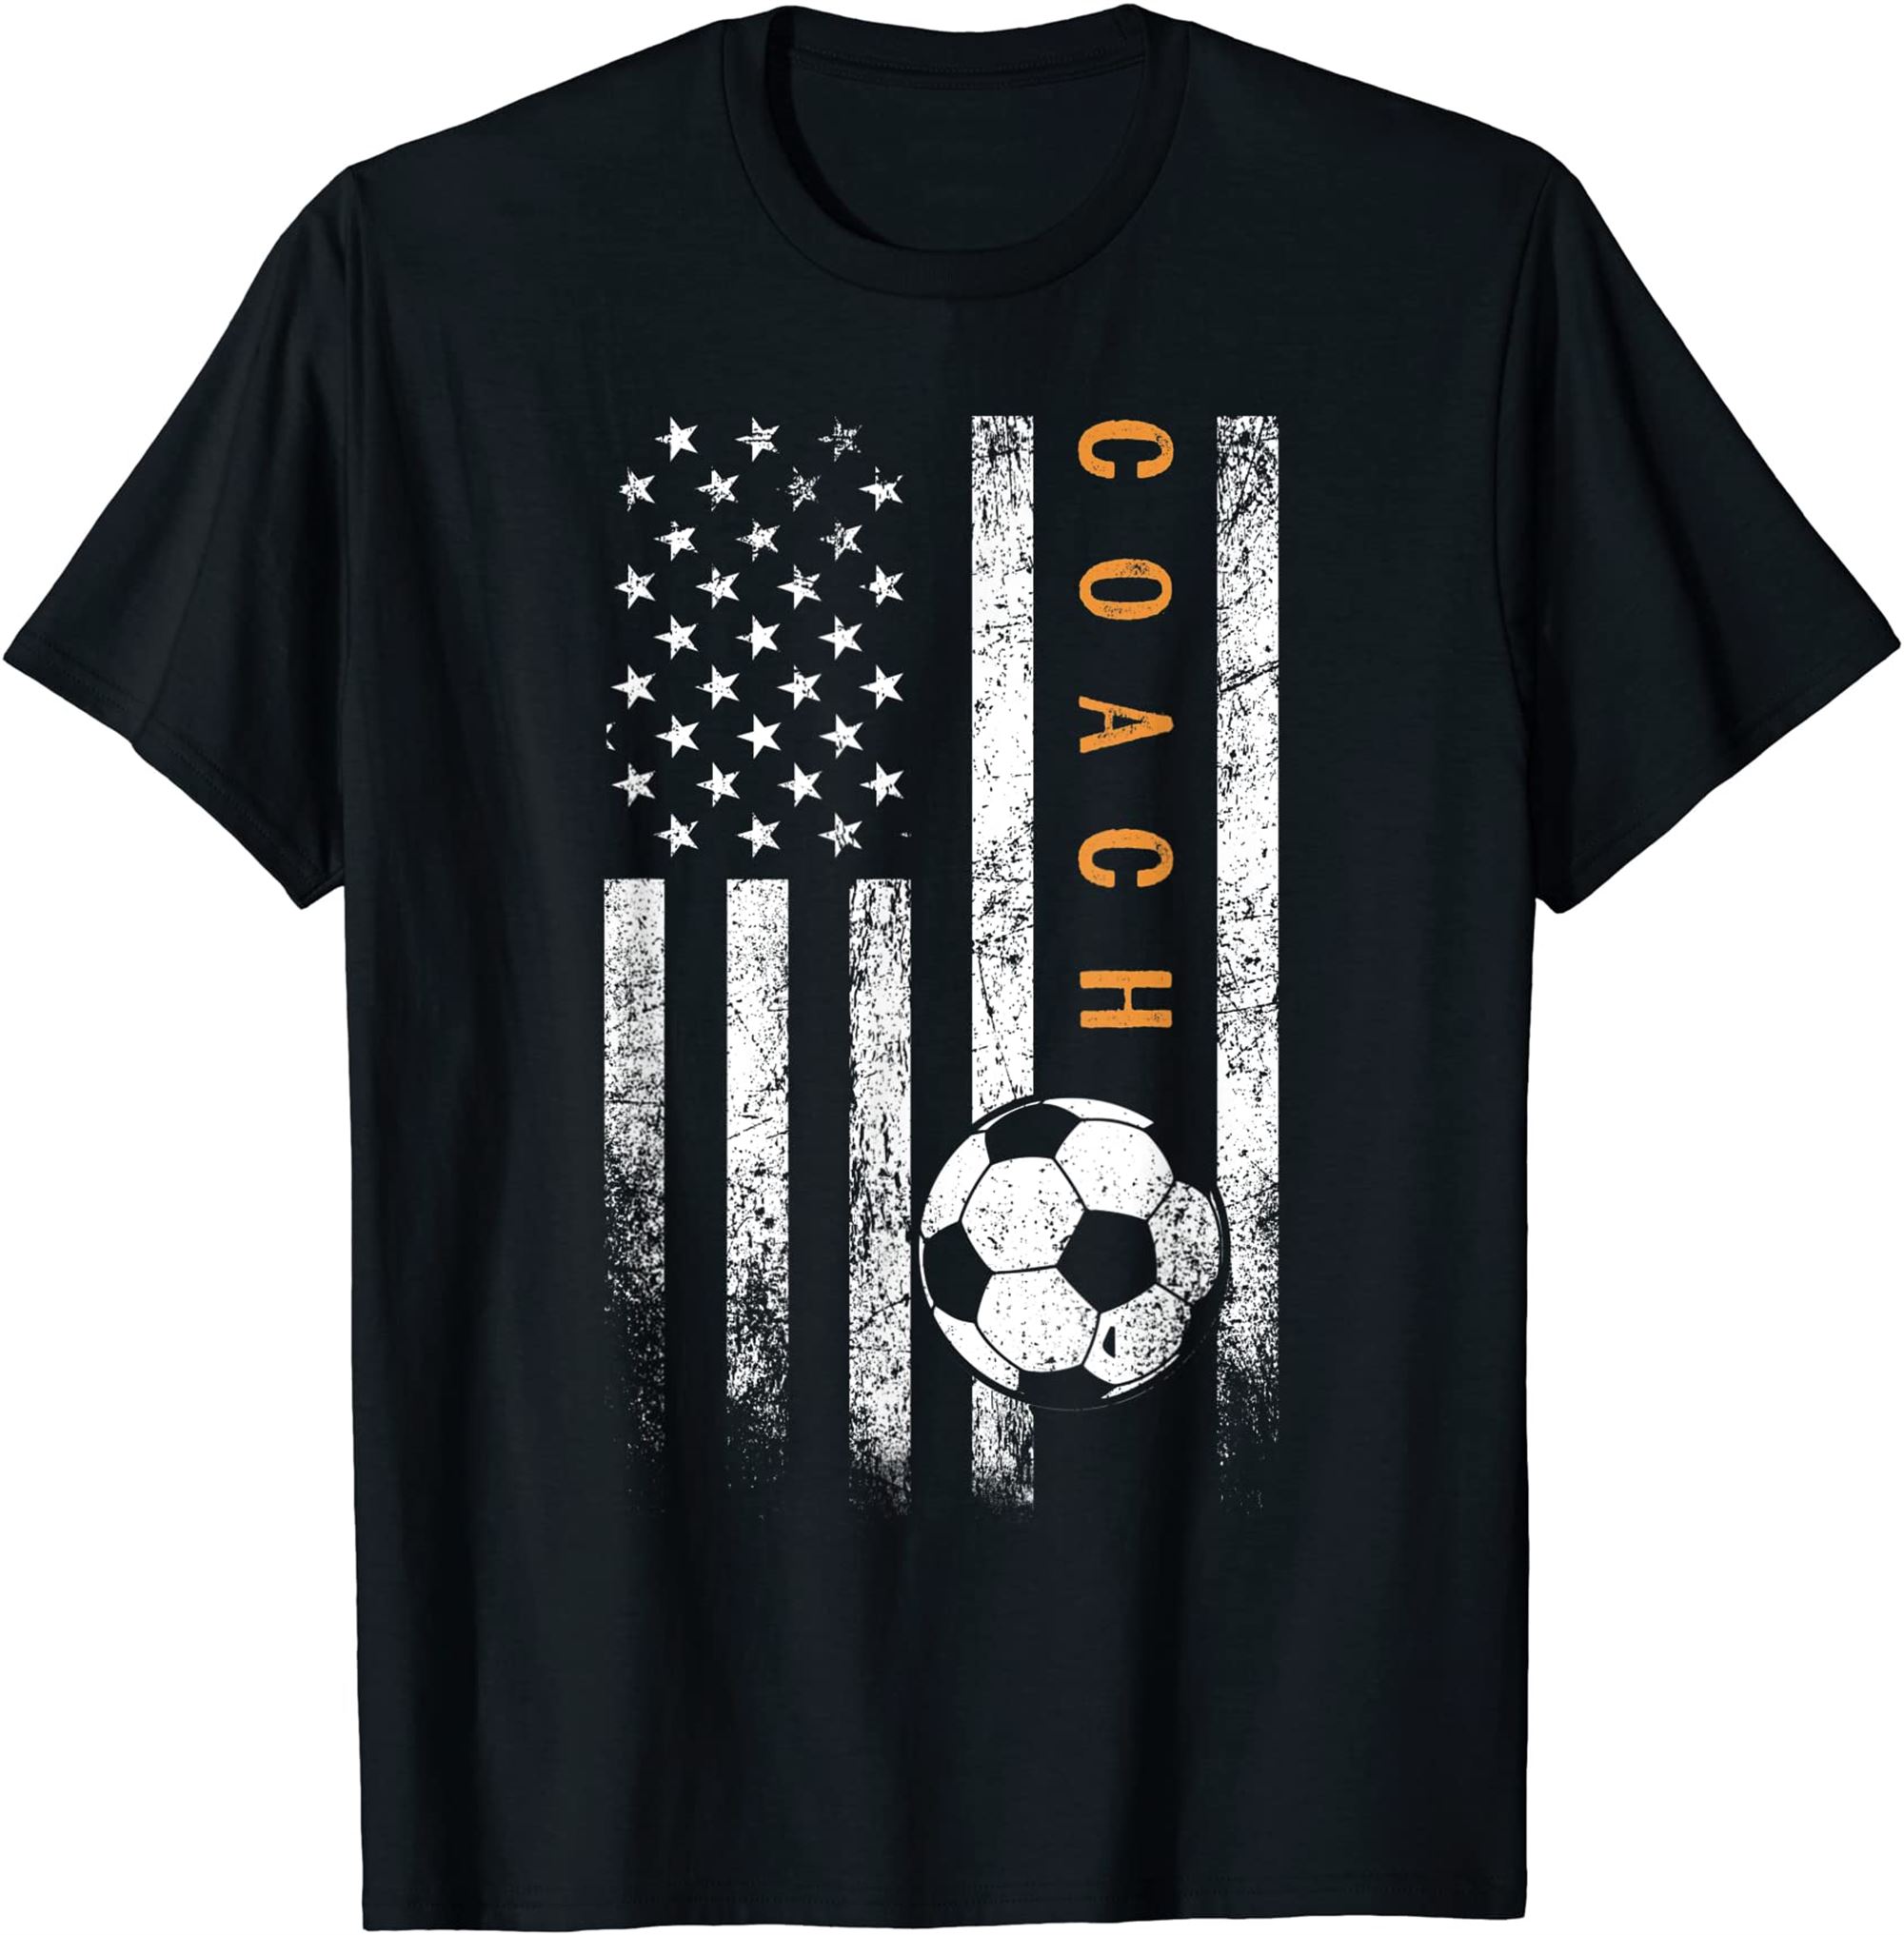 Soccer Coach American Flag Design Soccer Trainer Coaching T-shirt Size Up To 5xl